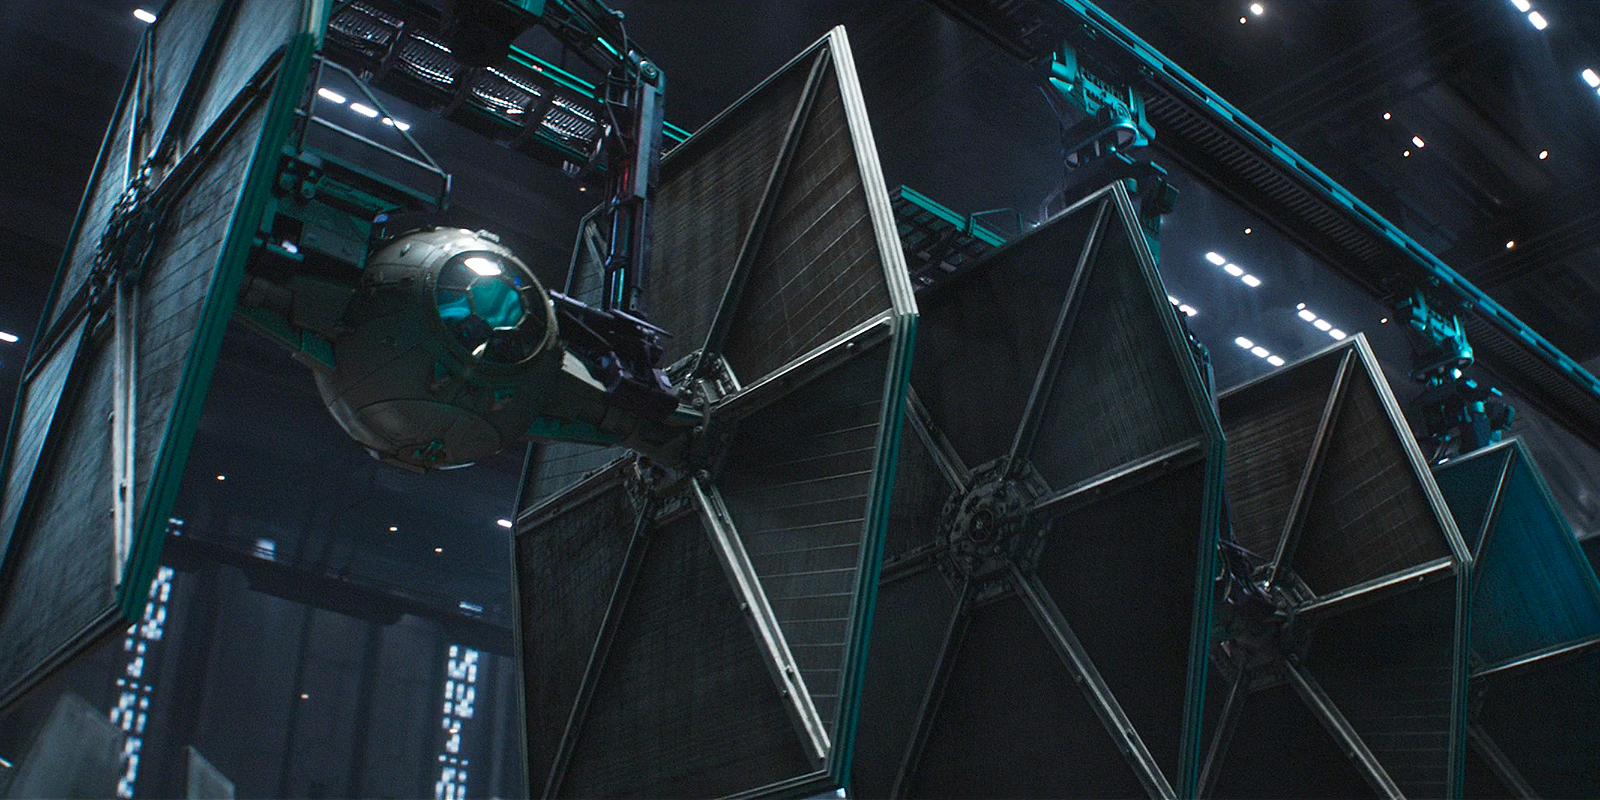 A still from Andor episode 6 showing TIE fighters in a rack.